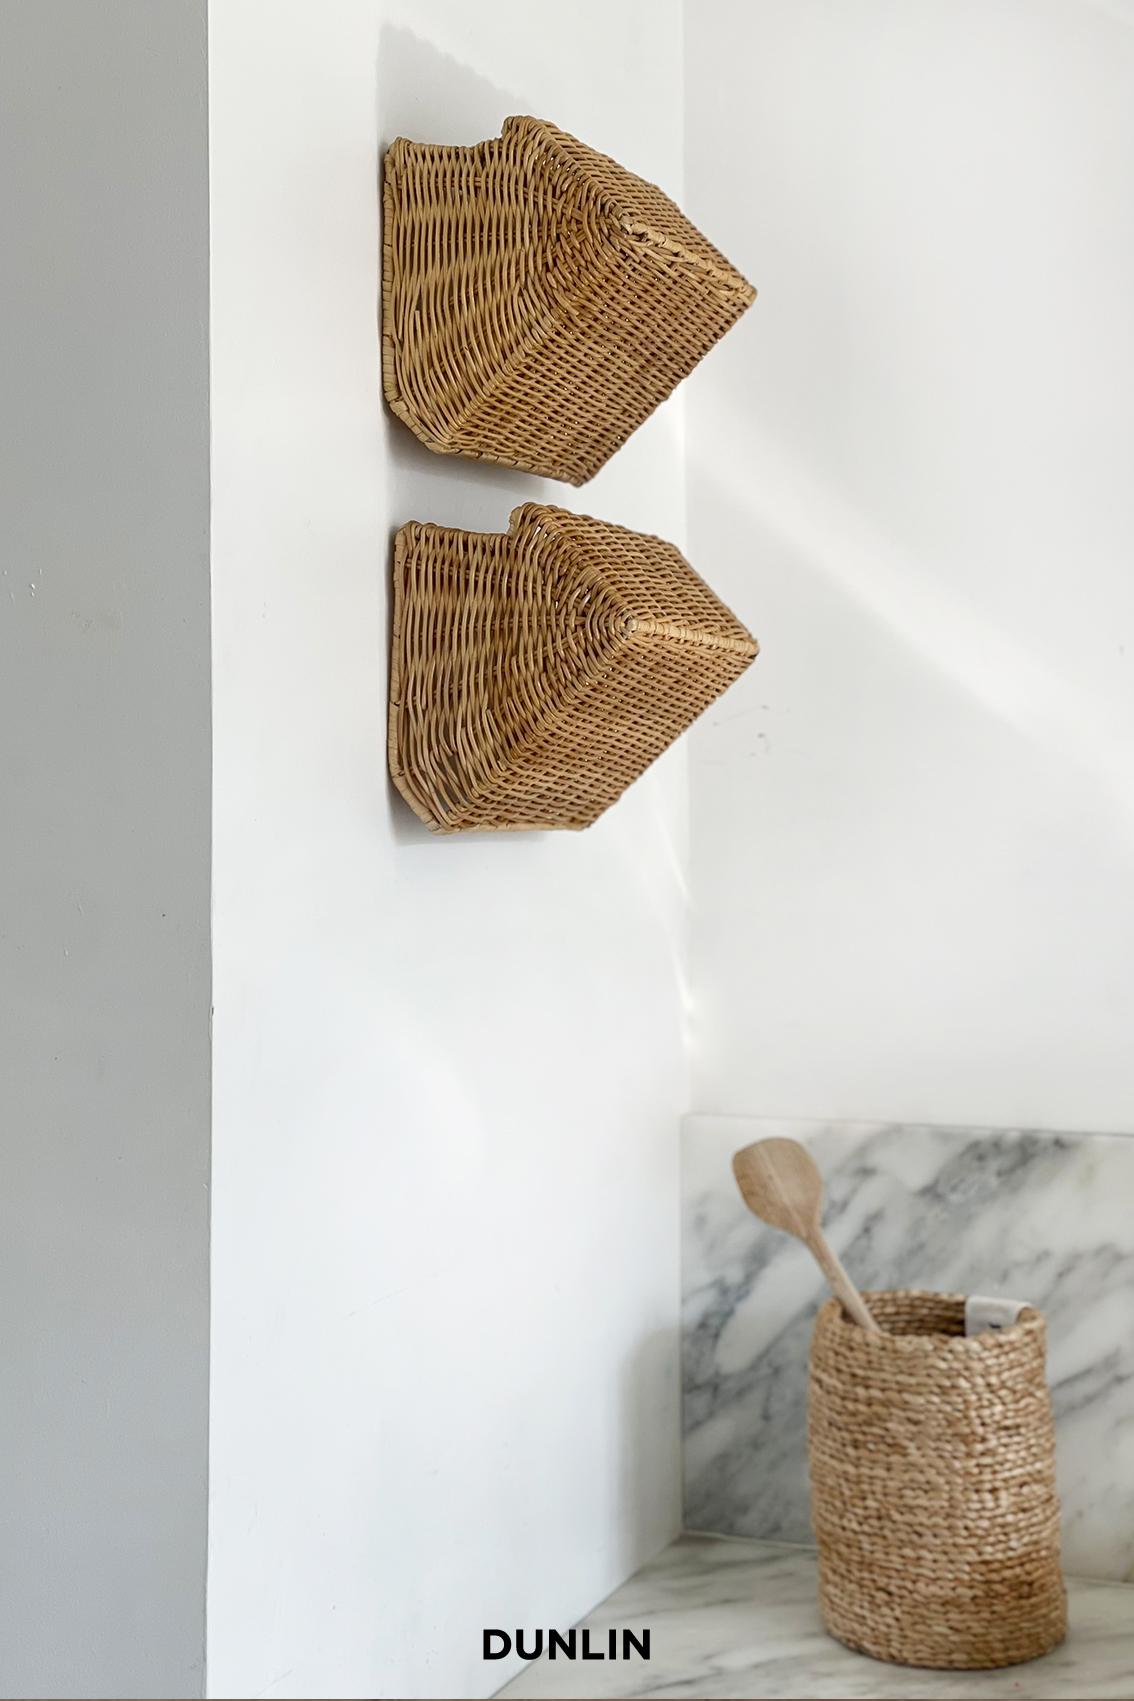 Handwoven Rattan in Indonesia. 
Designed by Dunlin.

An elegant, perfectly proportioned rattan wall sconce designed by Dunlin. Timeless in form and impeccable in execution, these are ideal sconces to frame artwork, crown a fireplace or run along a